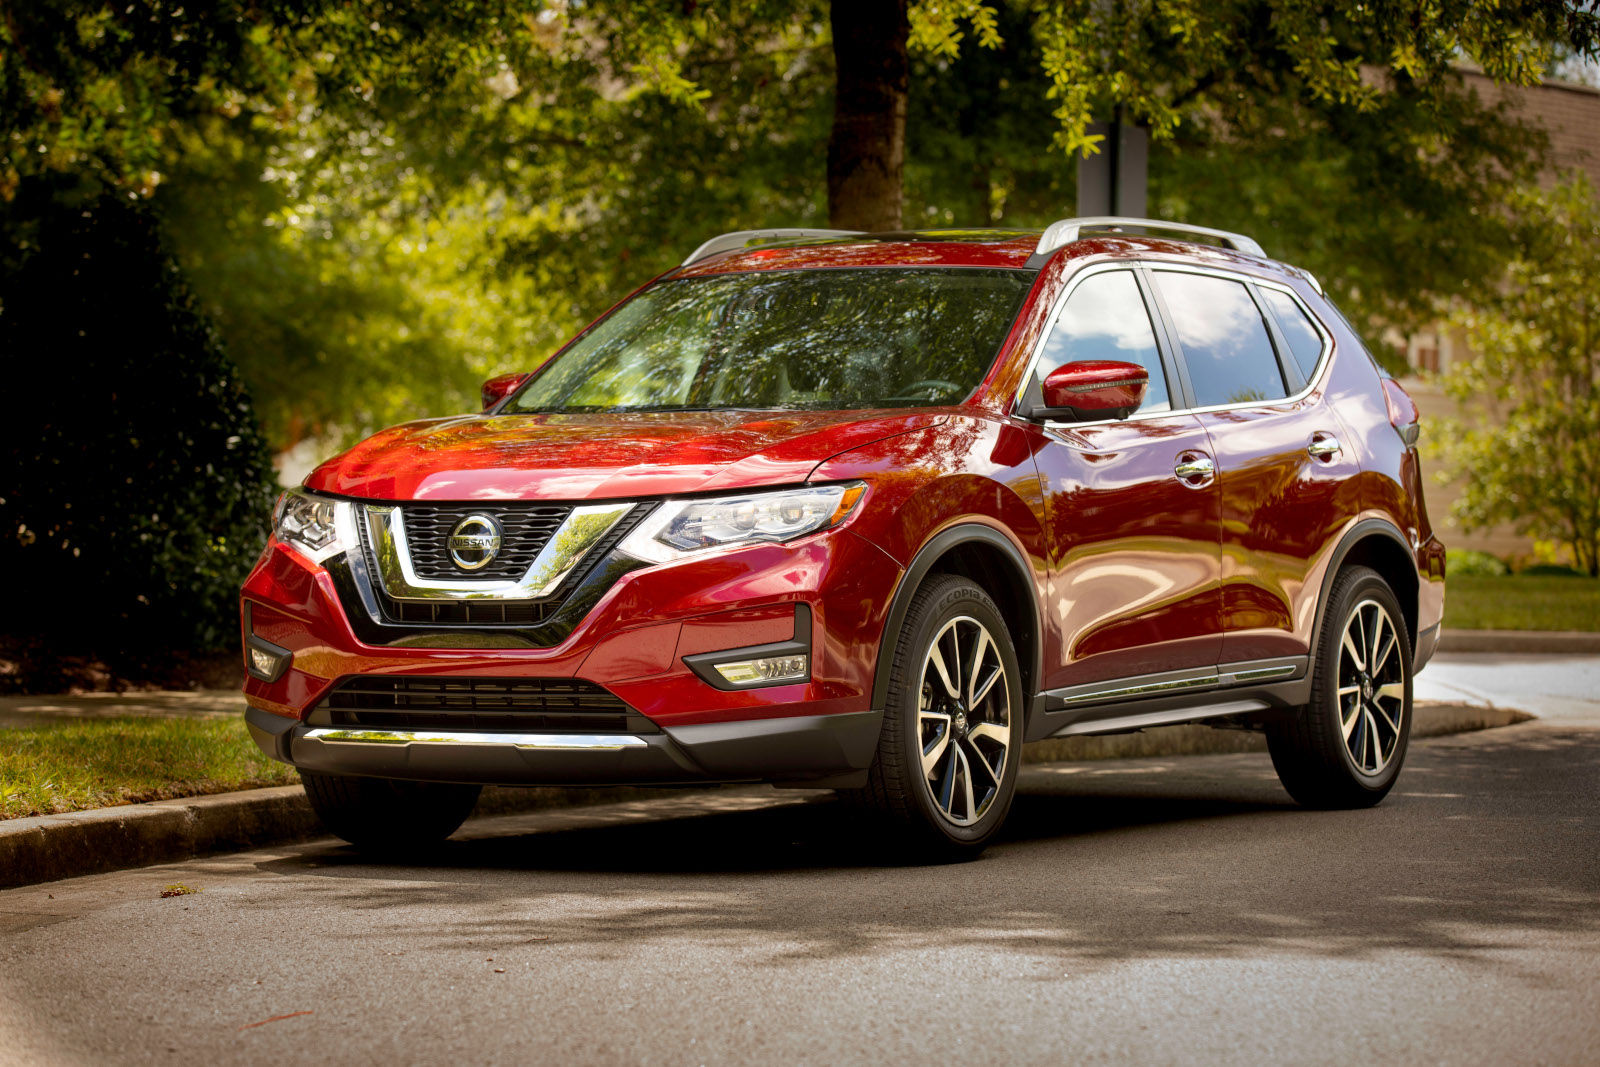 Why should you consider a pre-owned Nissan Rogue as your next SUV?